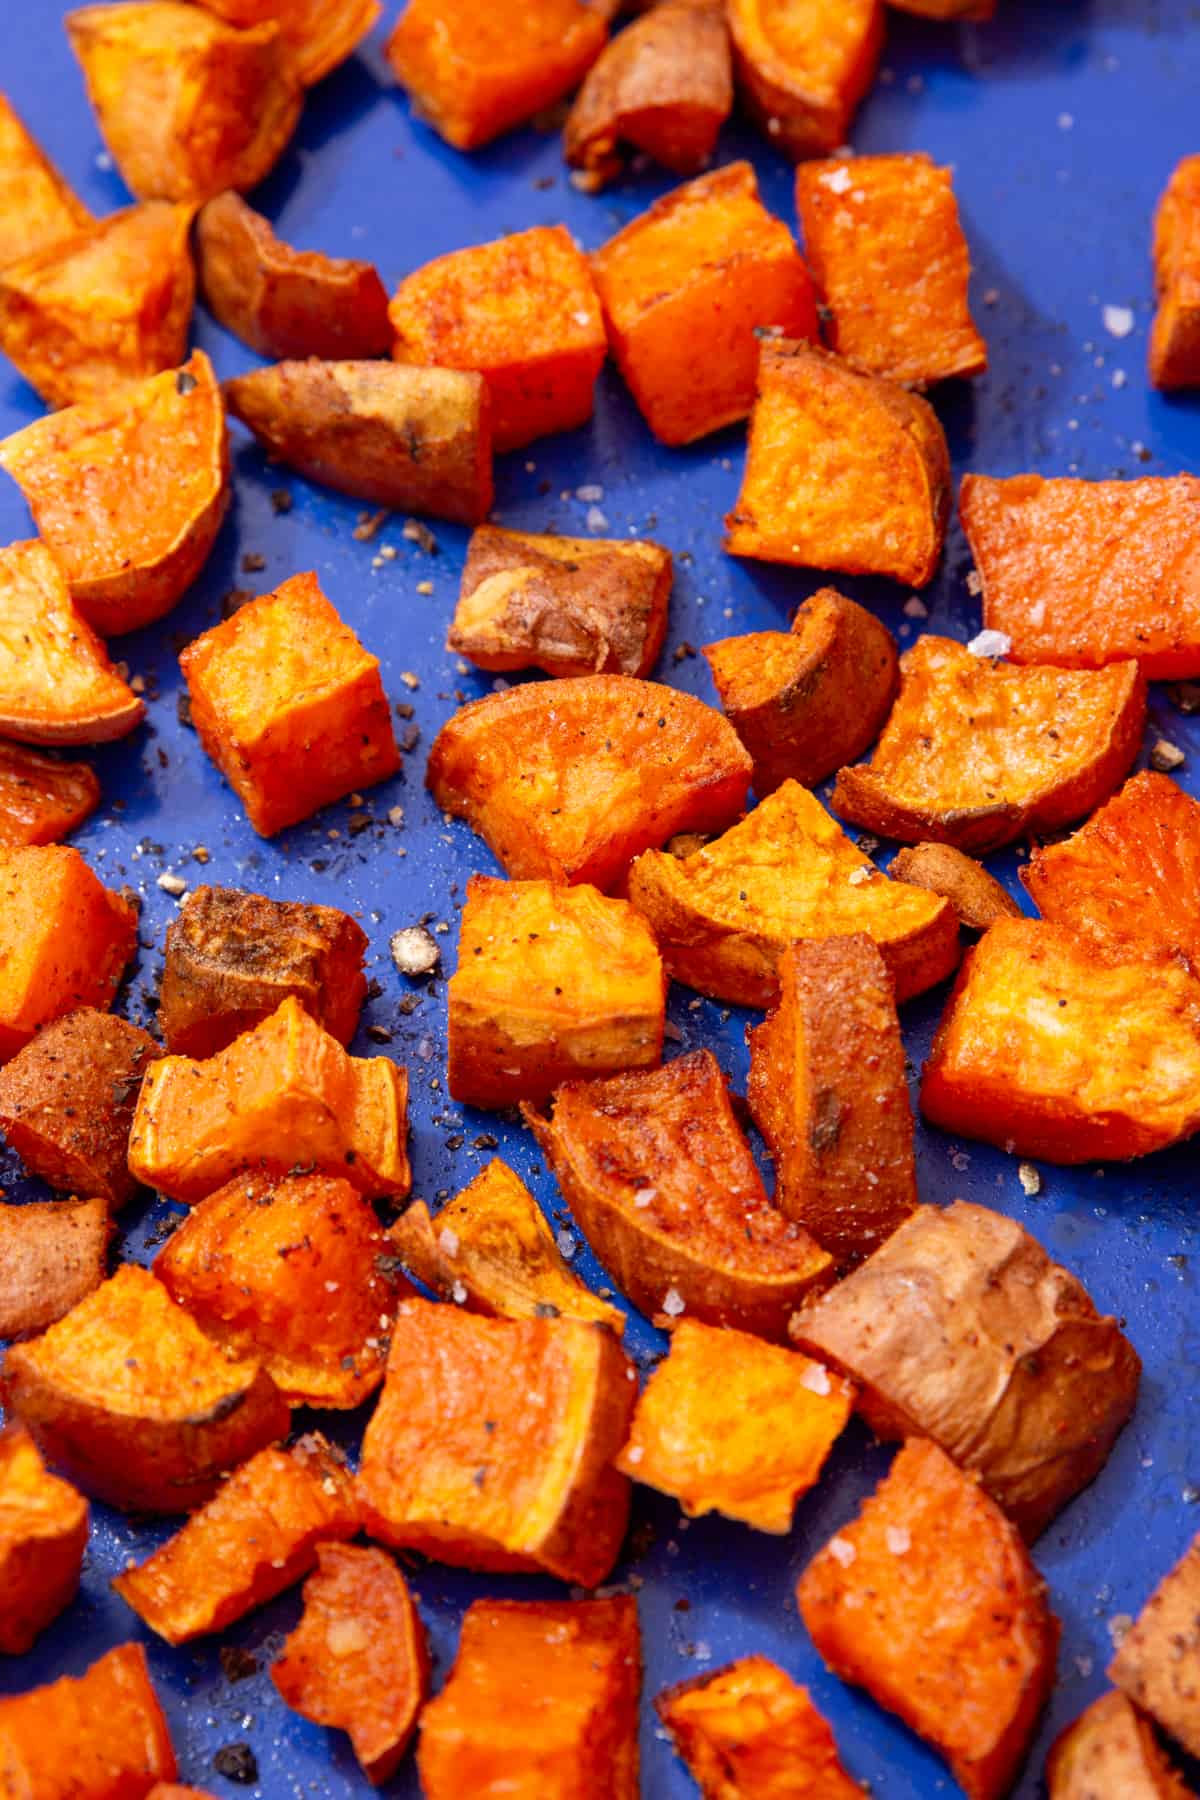 roasted sweet potato cubes spread out on a blue tray topped with some coarse salt.